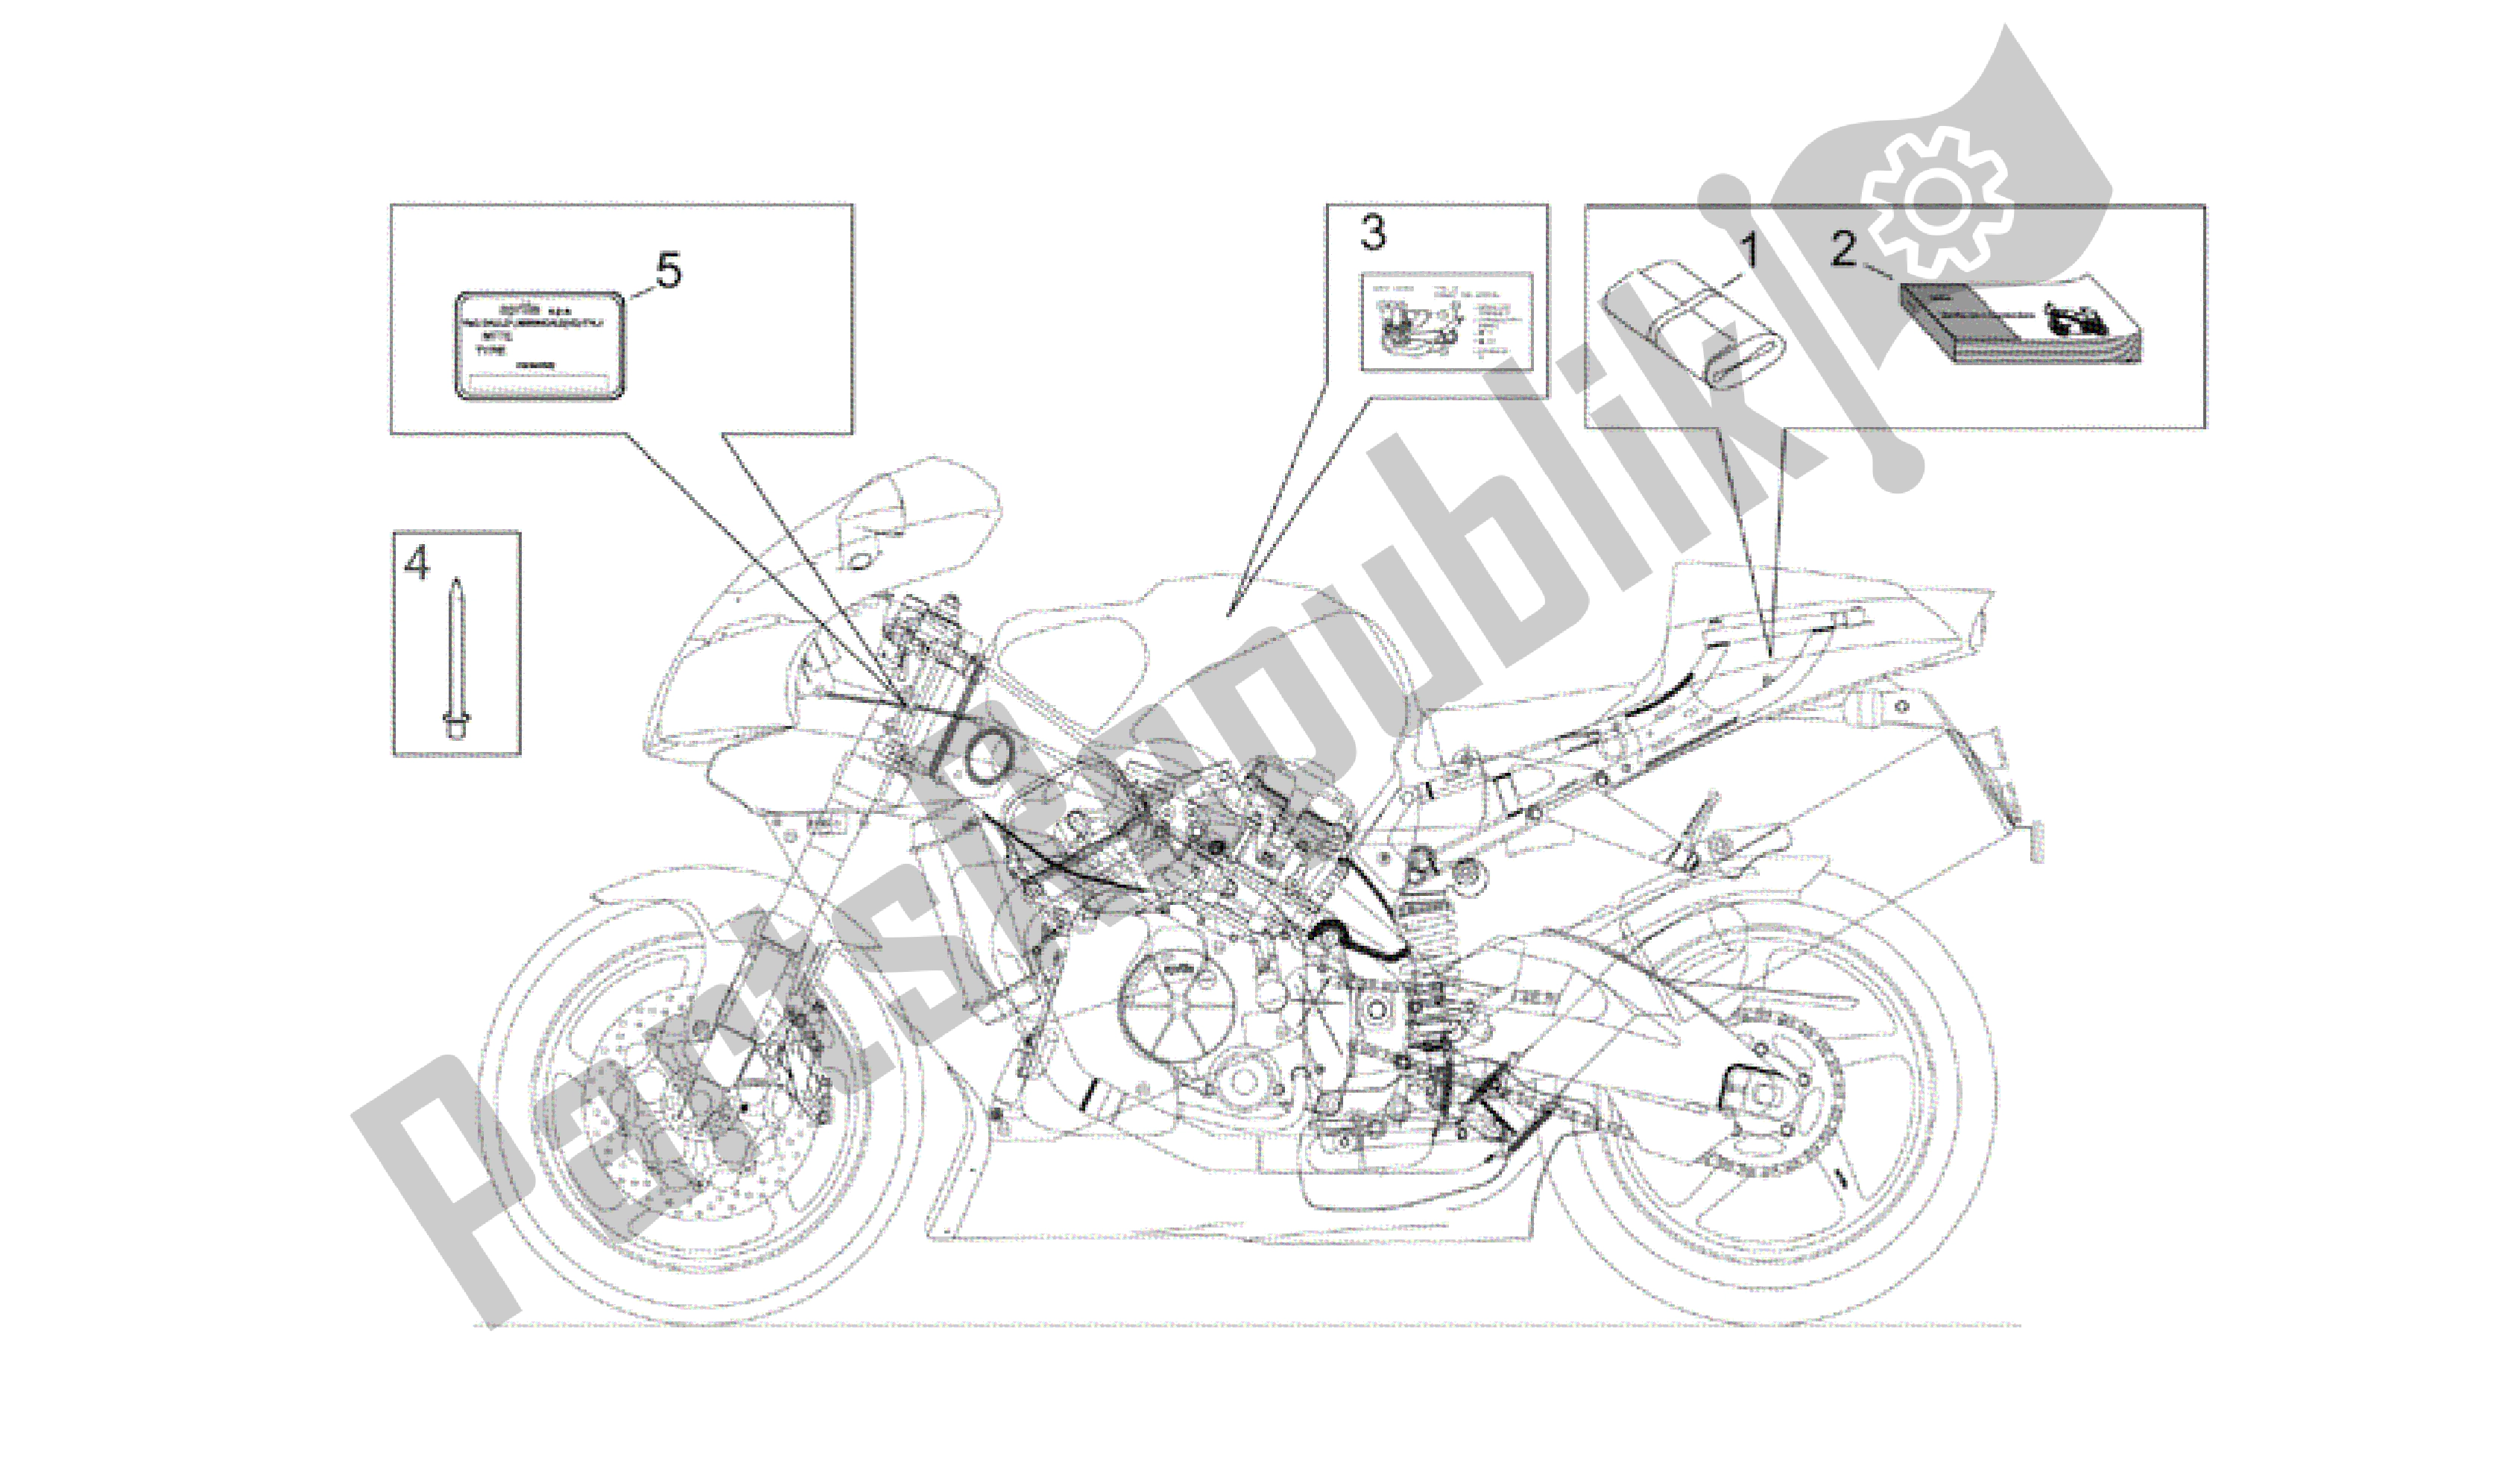 All parts for the Plate Set And Handbooks of the Aprilia RSV Mille R 3963 1000 2003